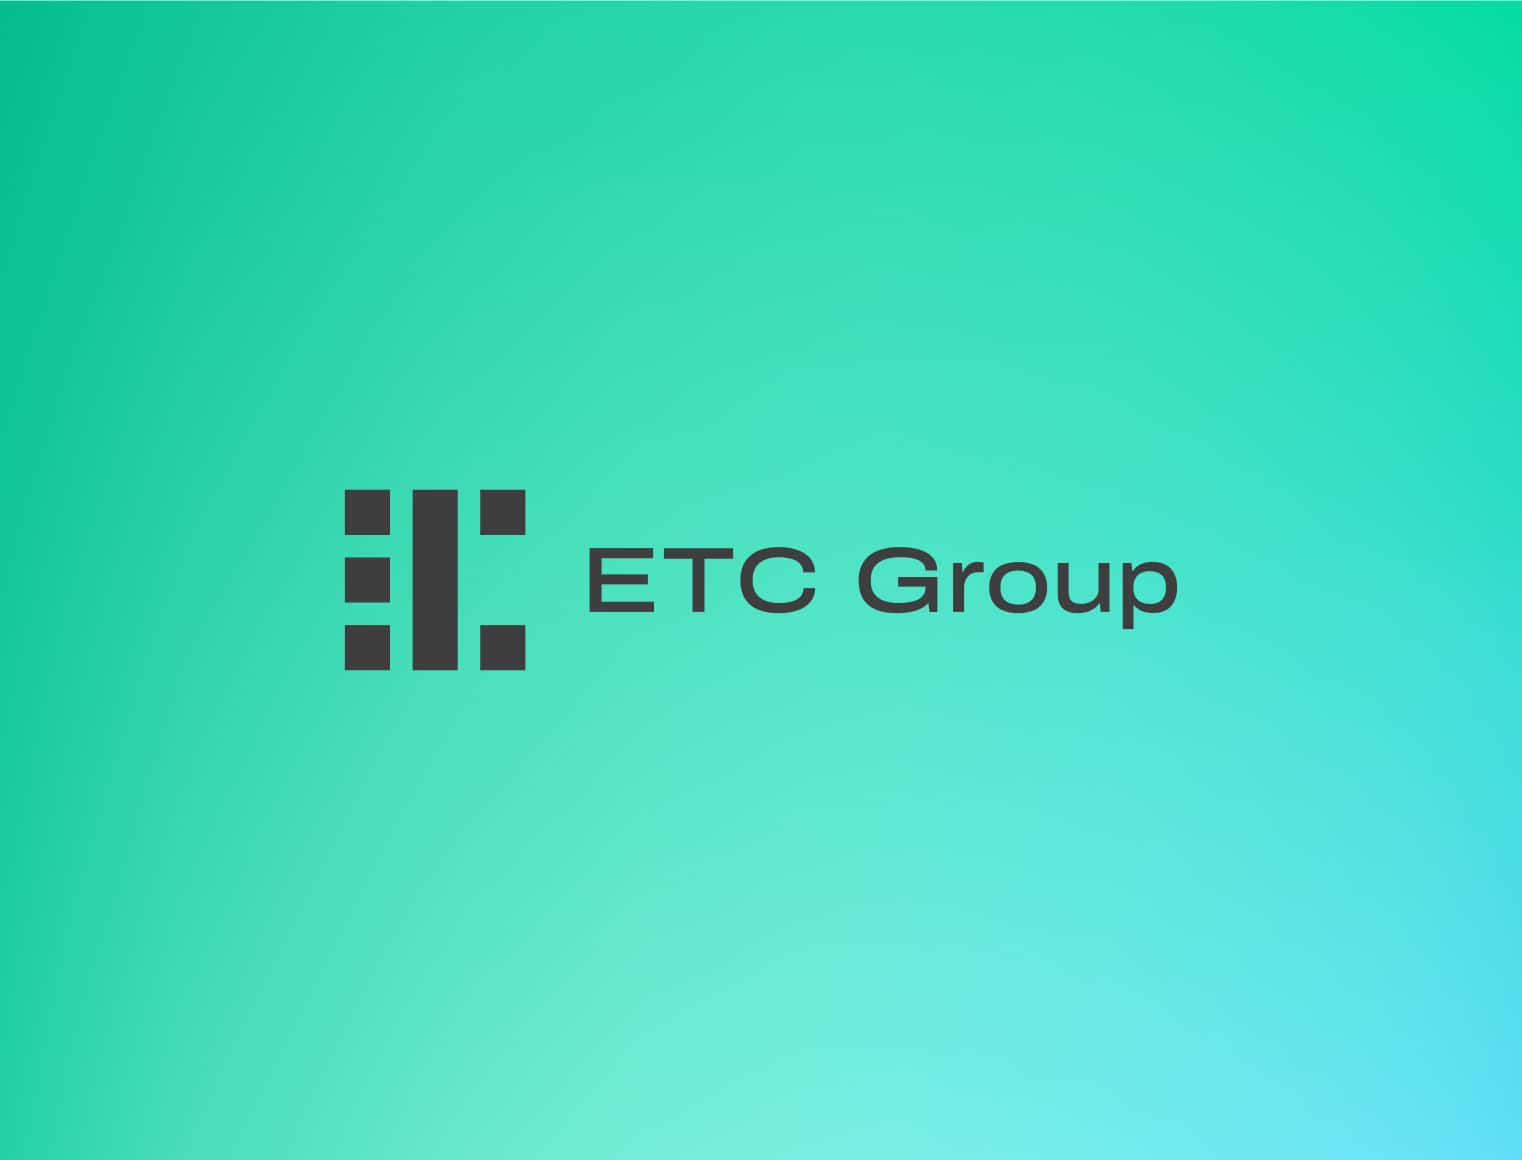 ETC Group and HANetf launch Europe’s first Metaverse thematic ETF 